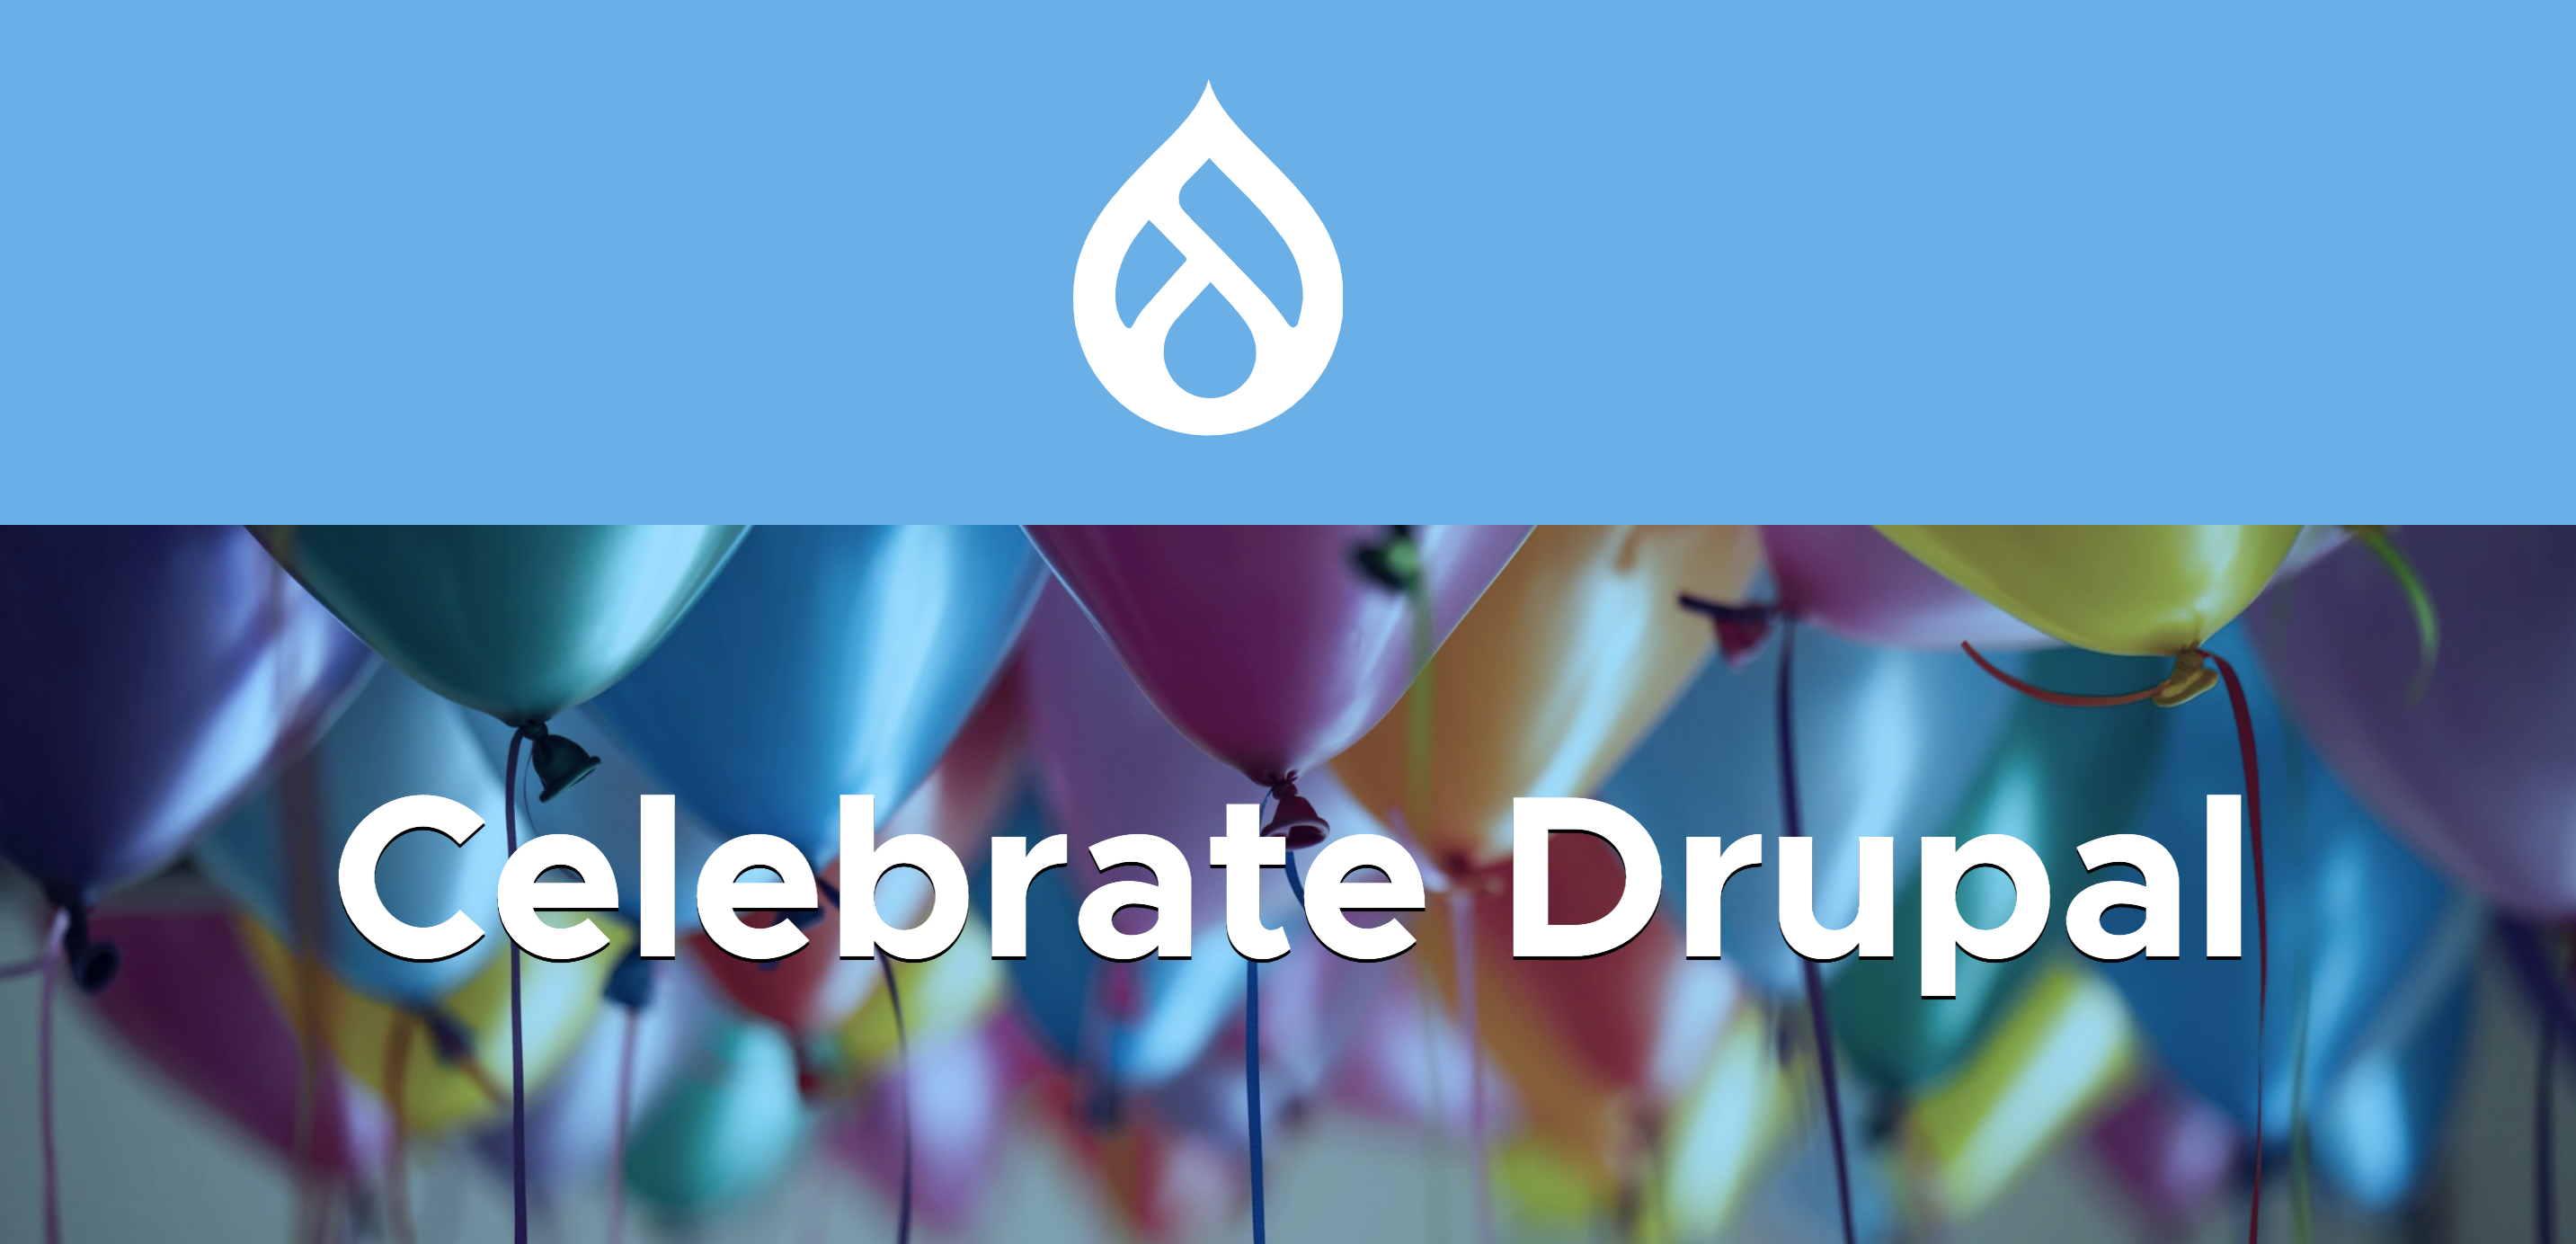 We are celebrating launch of Drupal 9.